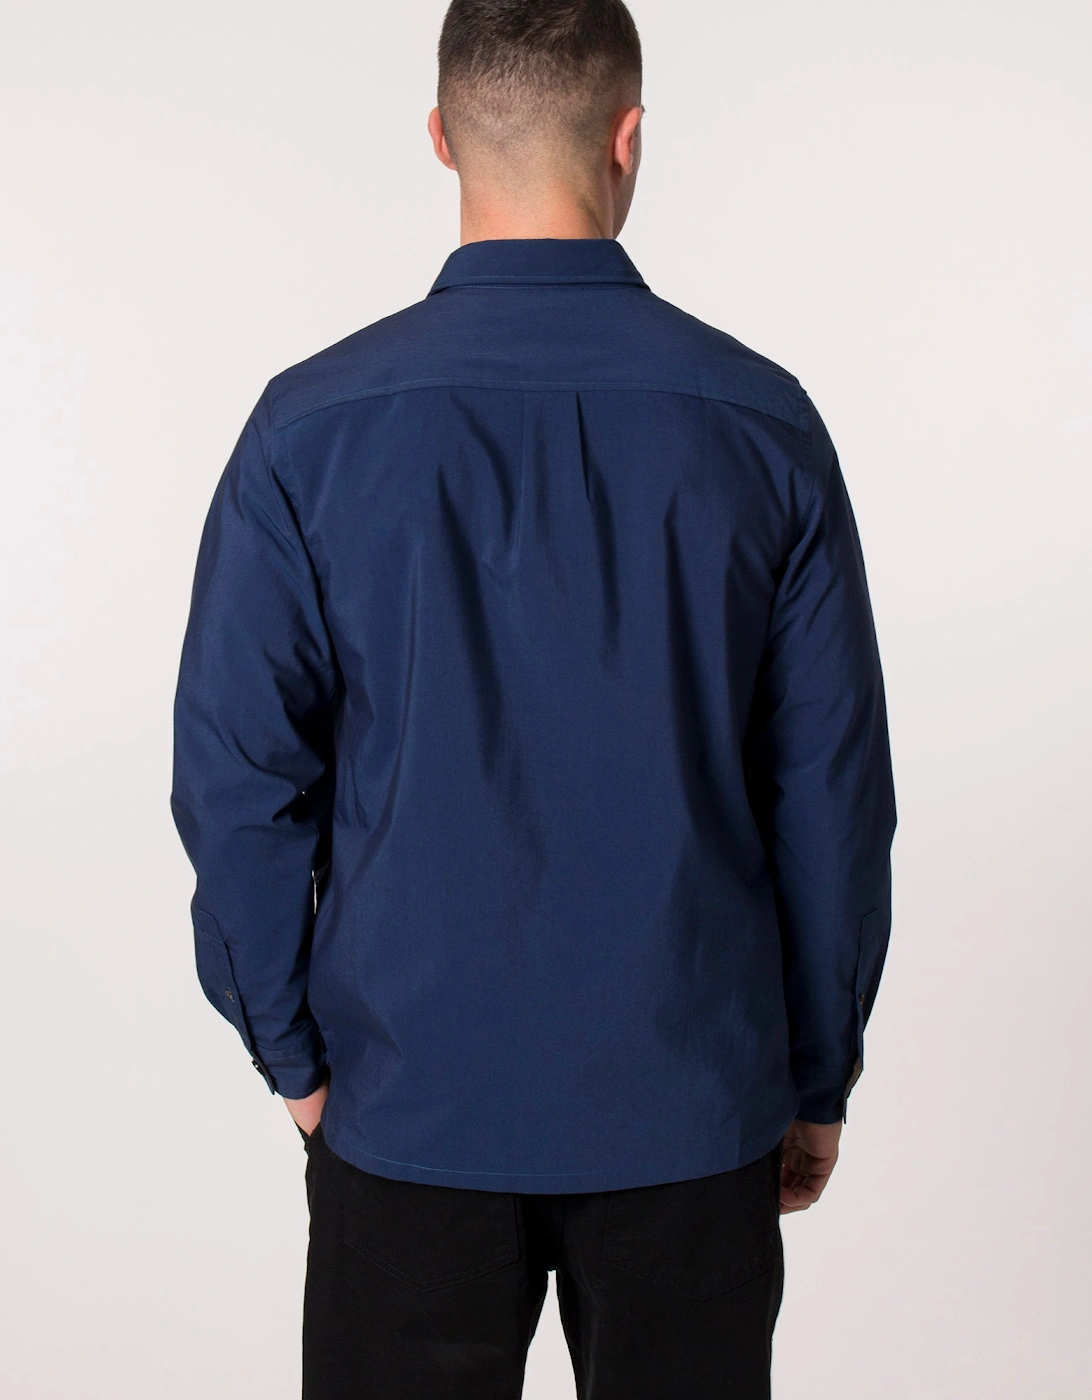 Relaxed Fit Two Pocket Shirt